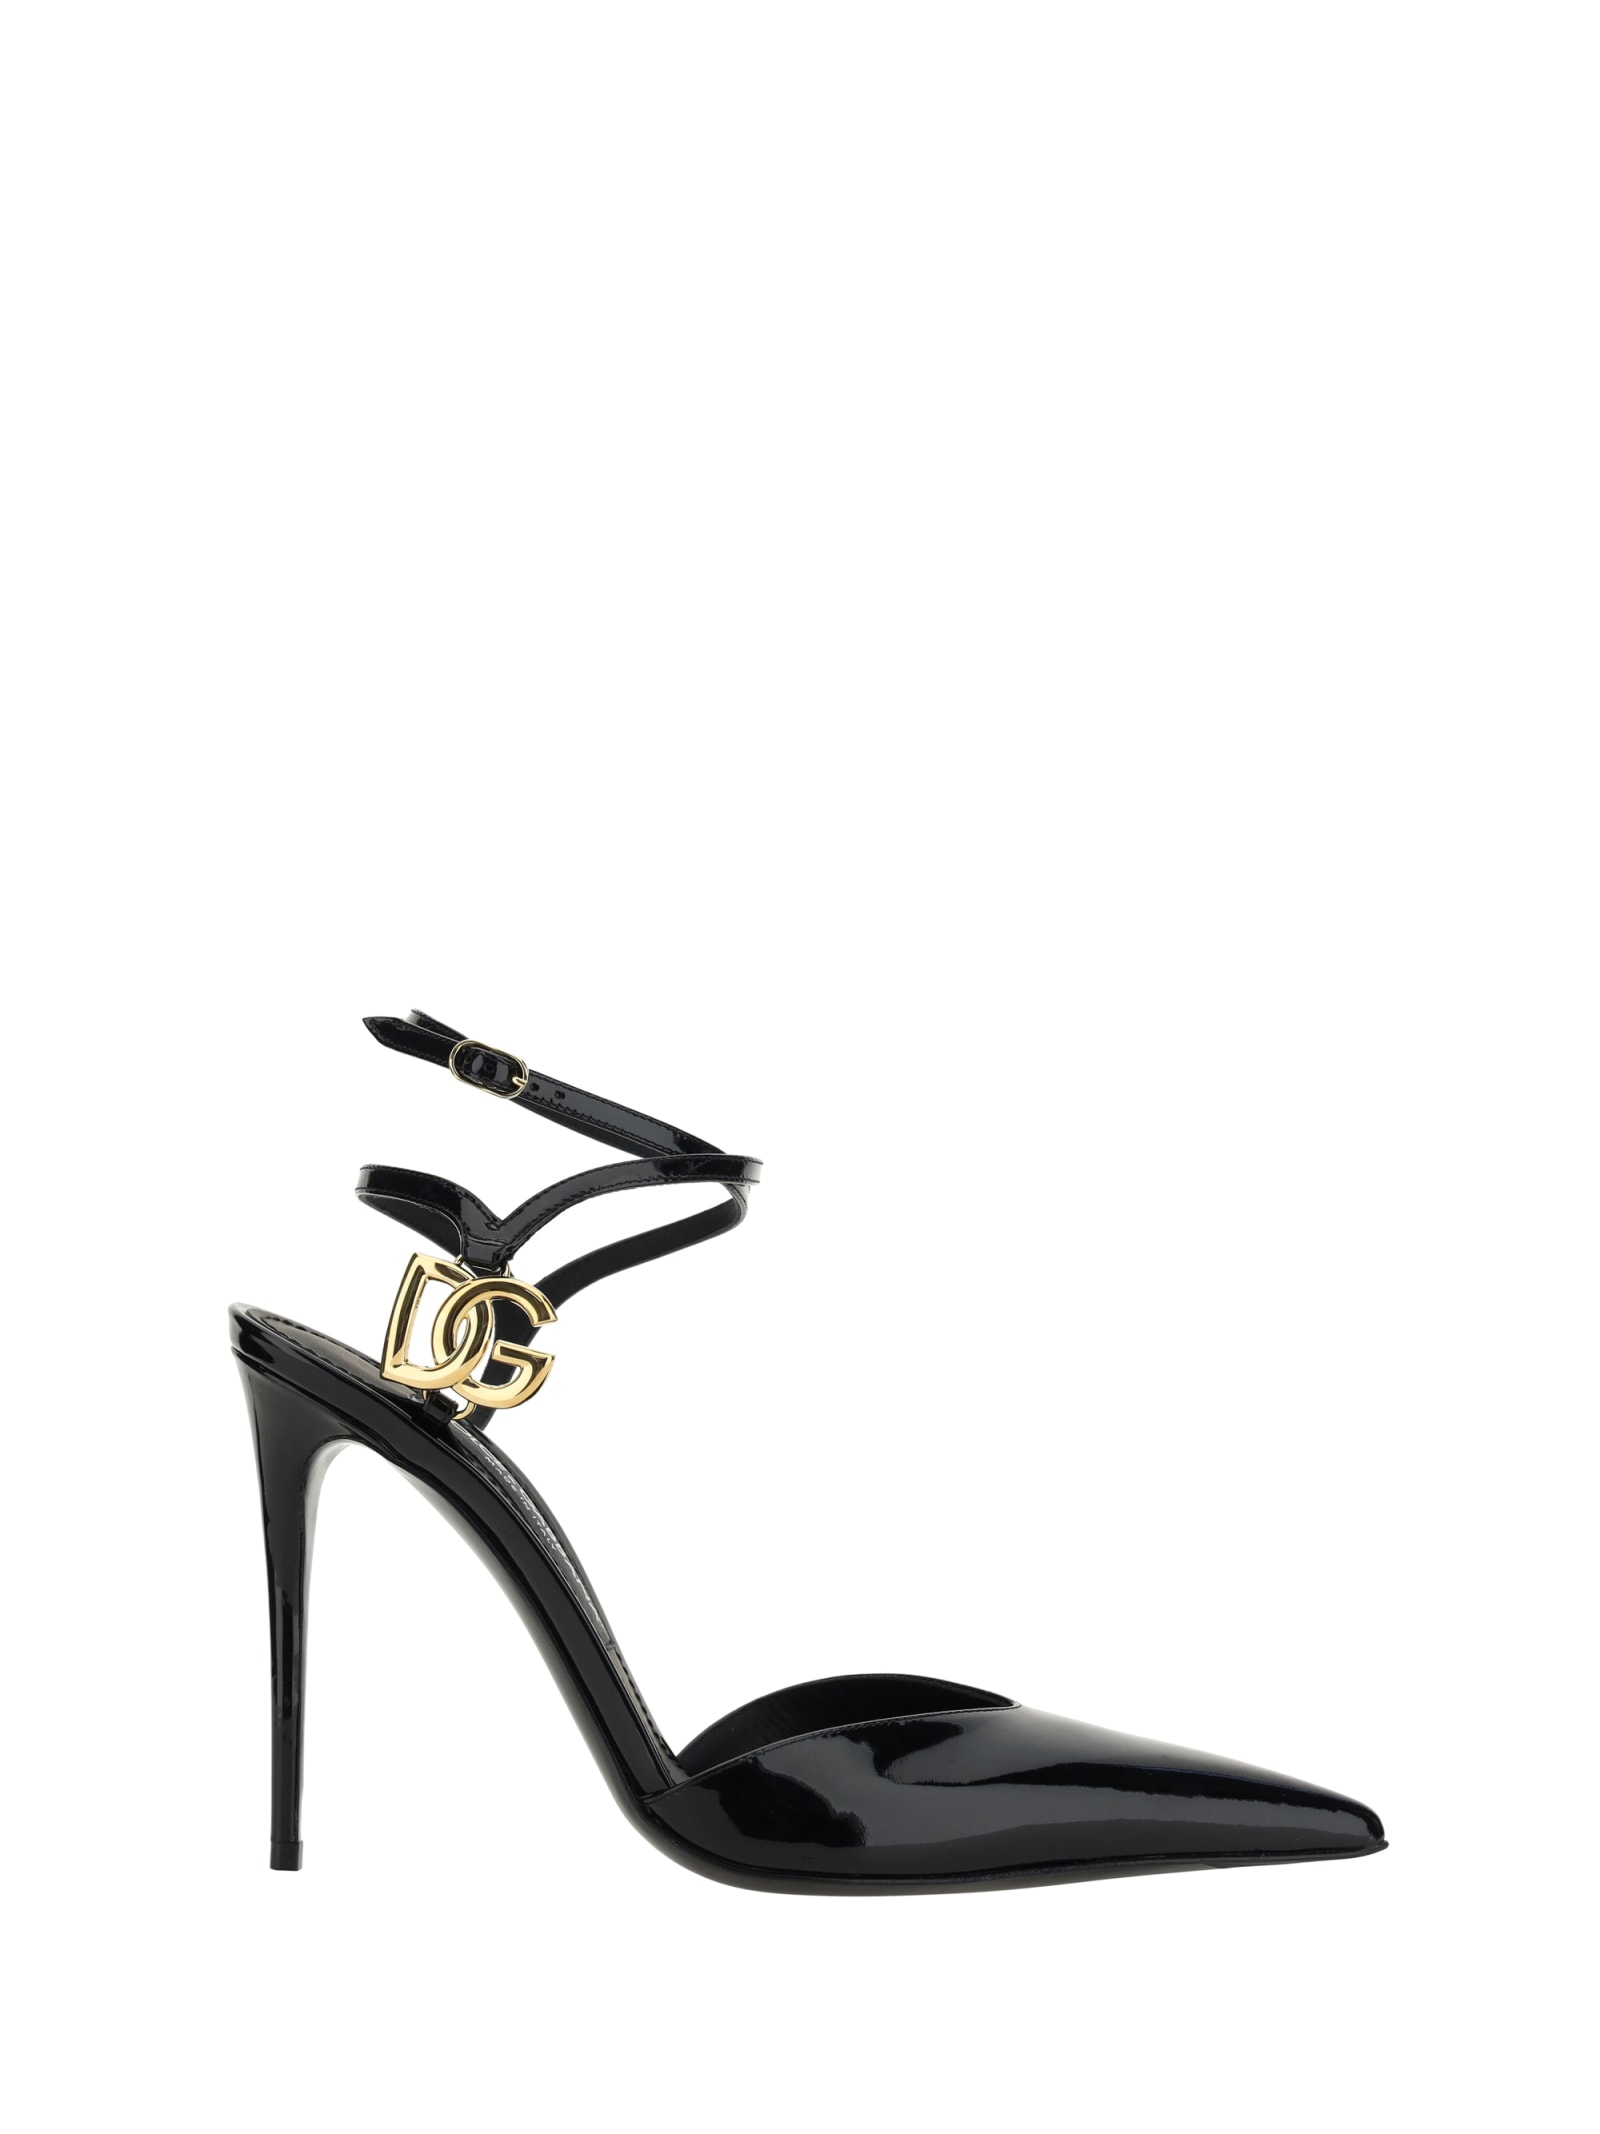 DOLCE & GABBANA LEATHER SLINGBACK PUMP WITH CHAIN AND CHARM